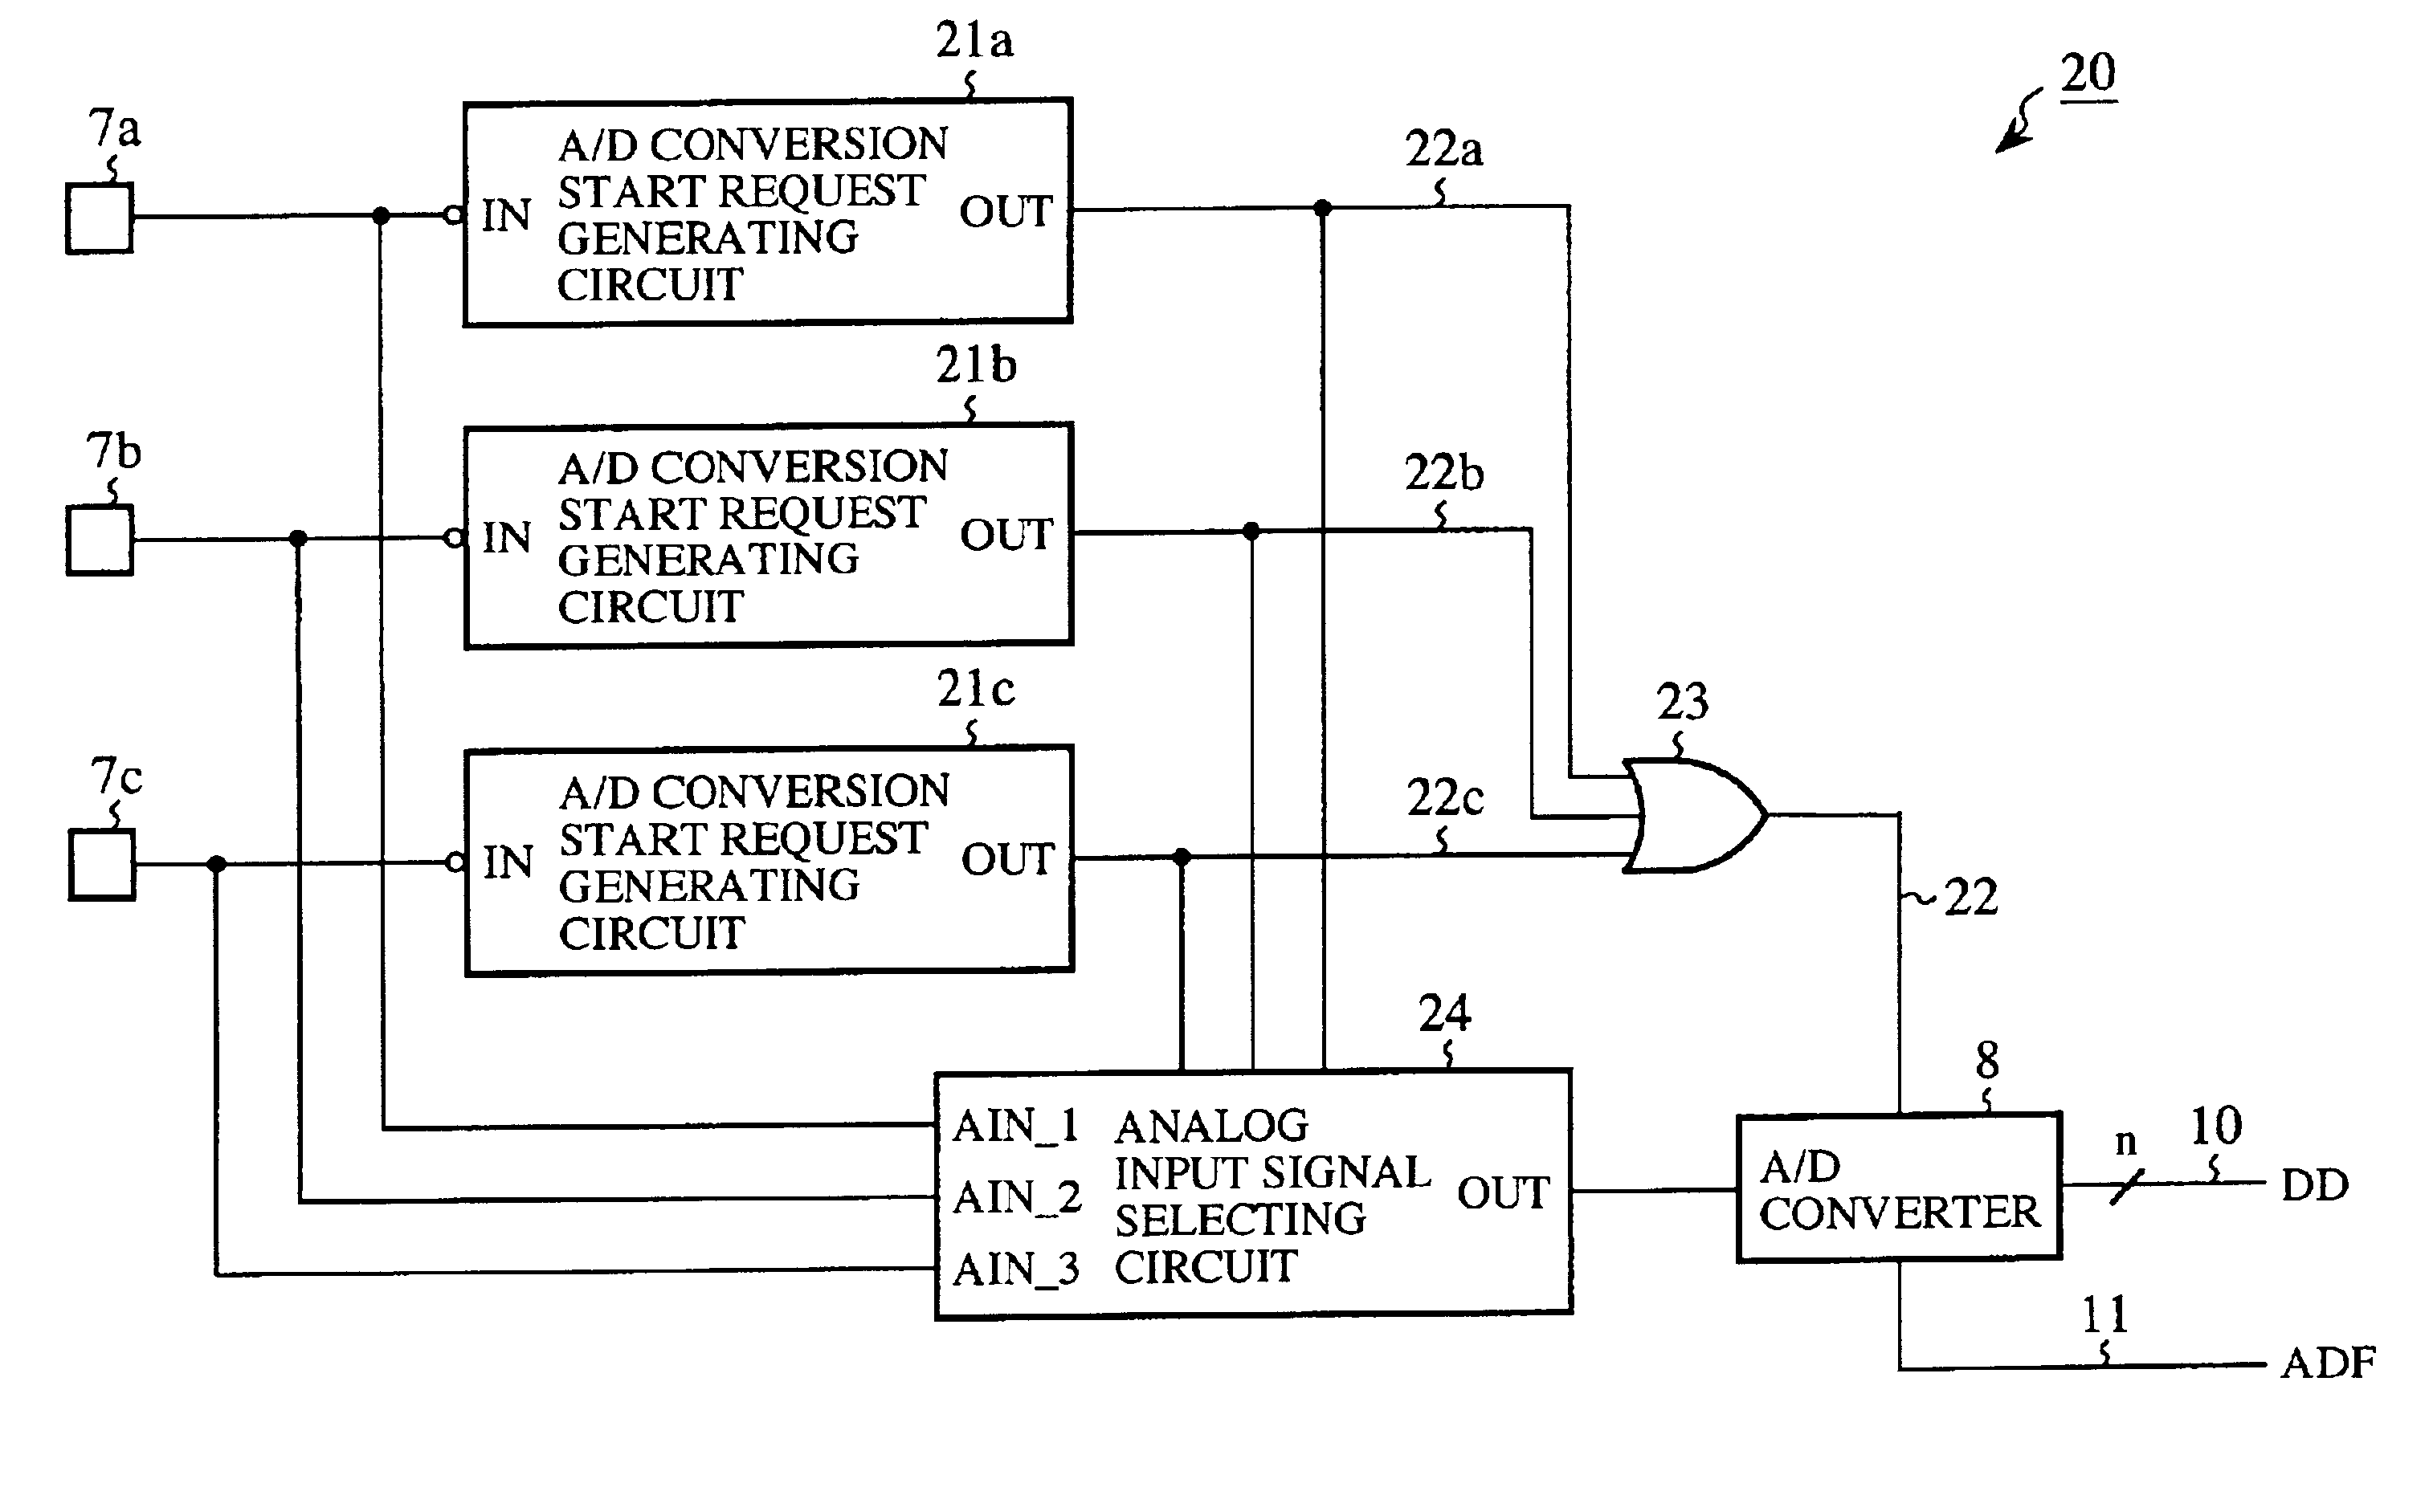 One-chip microcomputer with analog-to-digital converter